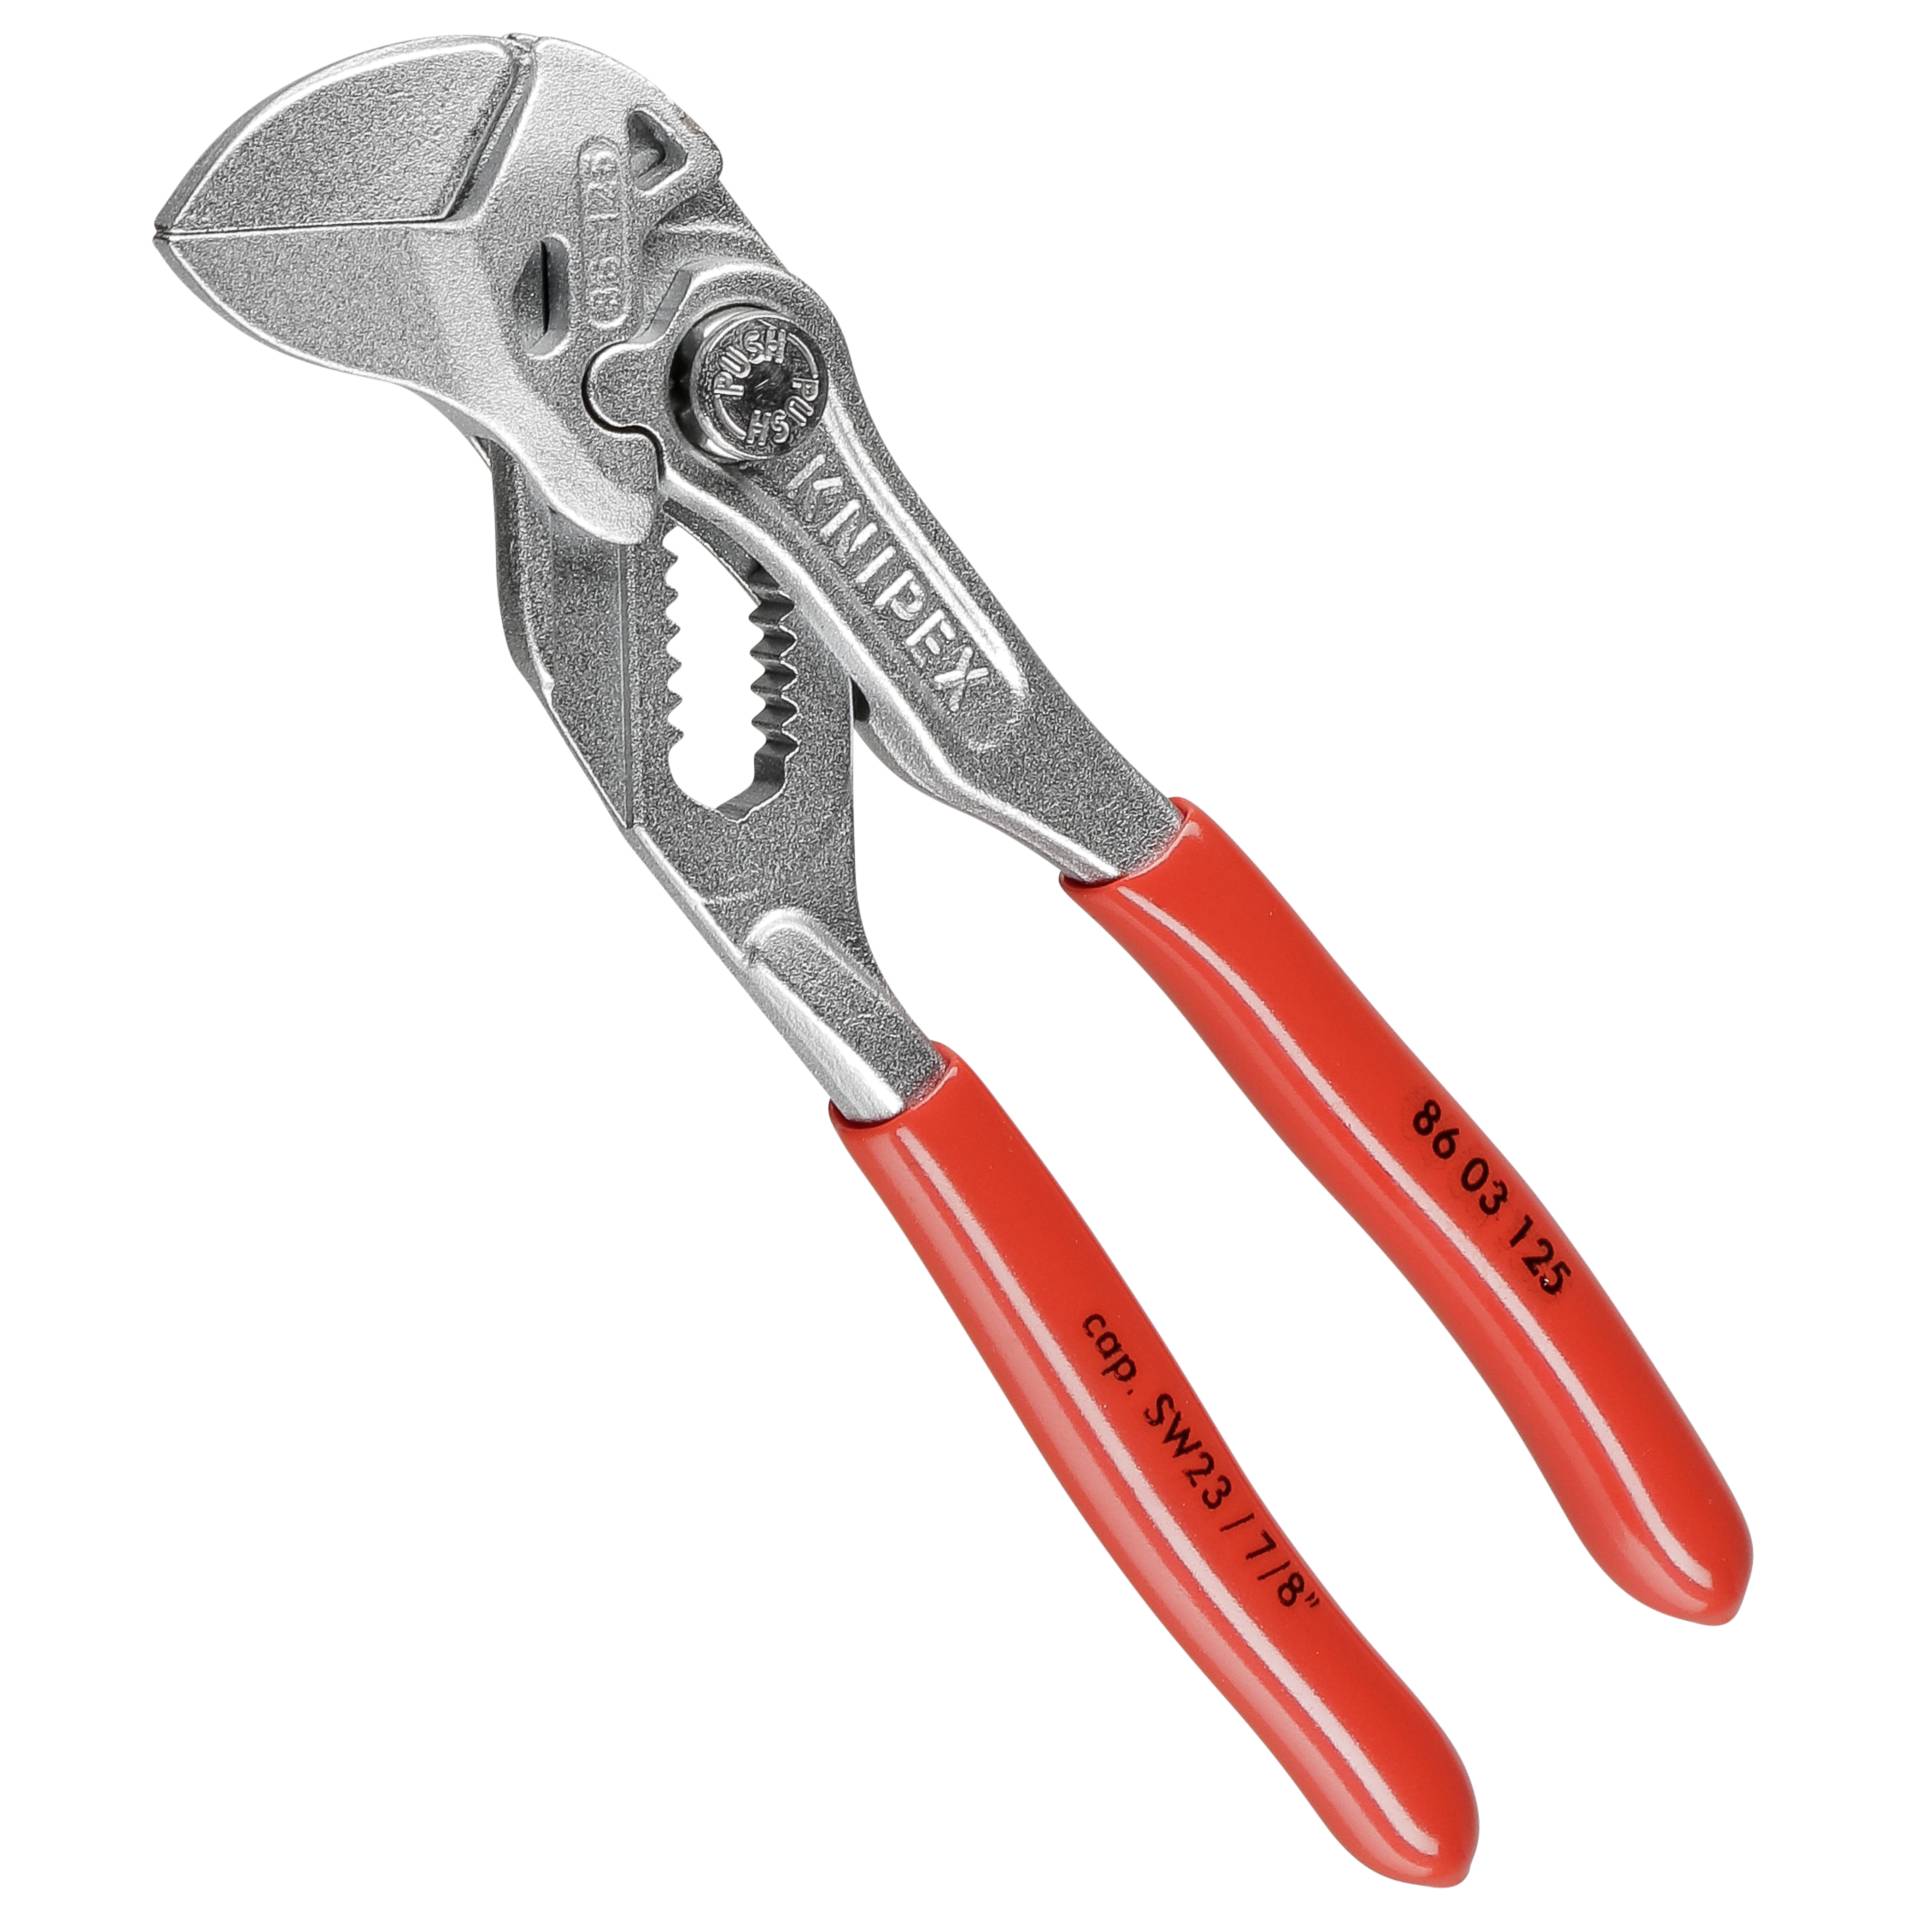 KNIPEX Pinza Chiave 125 mm Rivestimento in resina sintetica